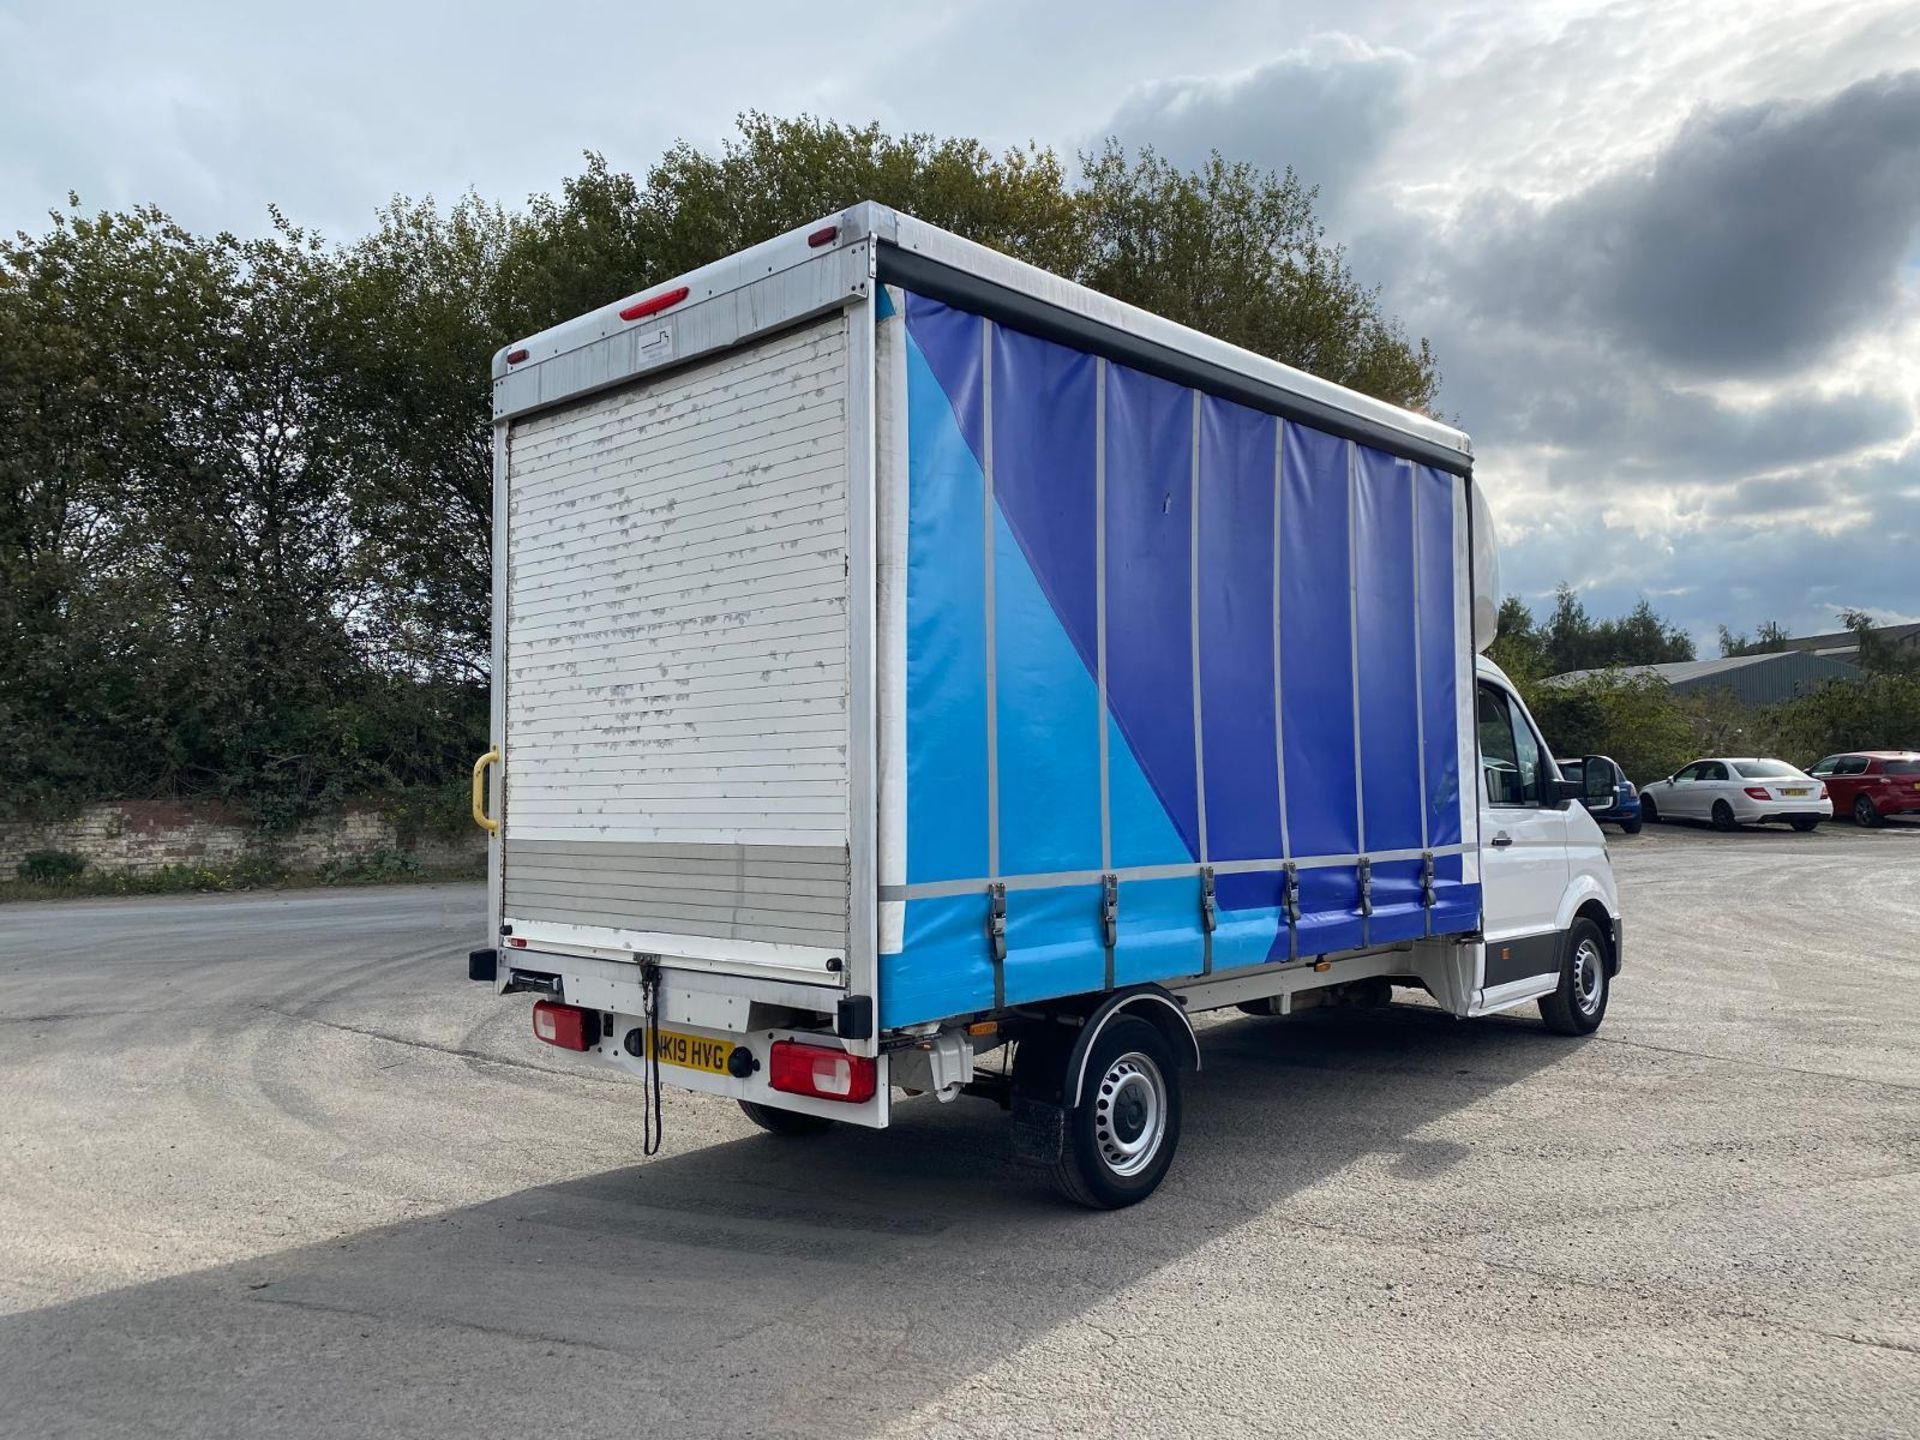 2019 VW CRAFTER 14FT CURTAIN SIDER: RELIABLE WORKHORSE - Image 6 of 12